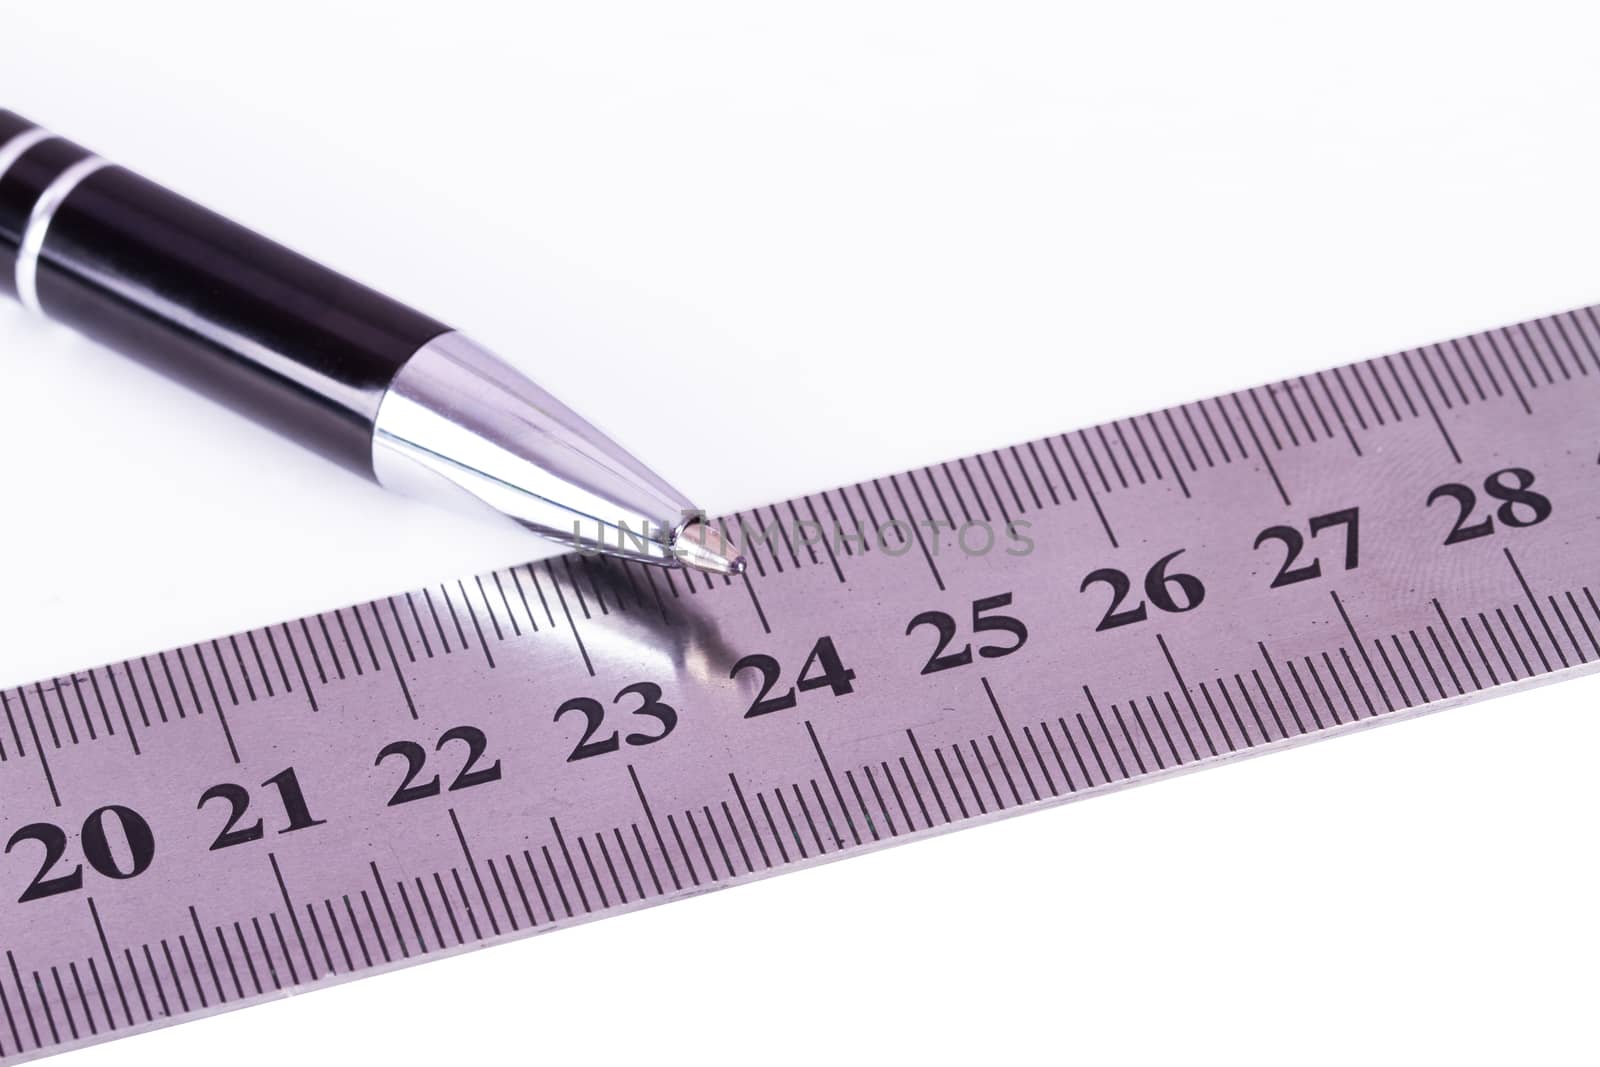 Close up view of pen and steel ruler for engineering drawing, isolated on white background.